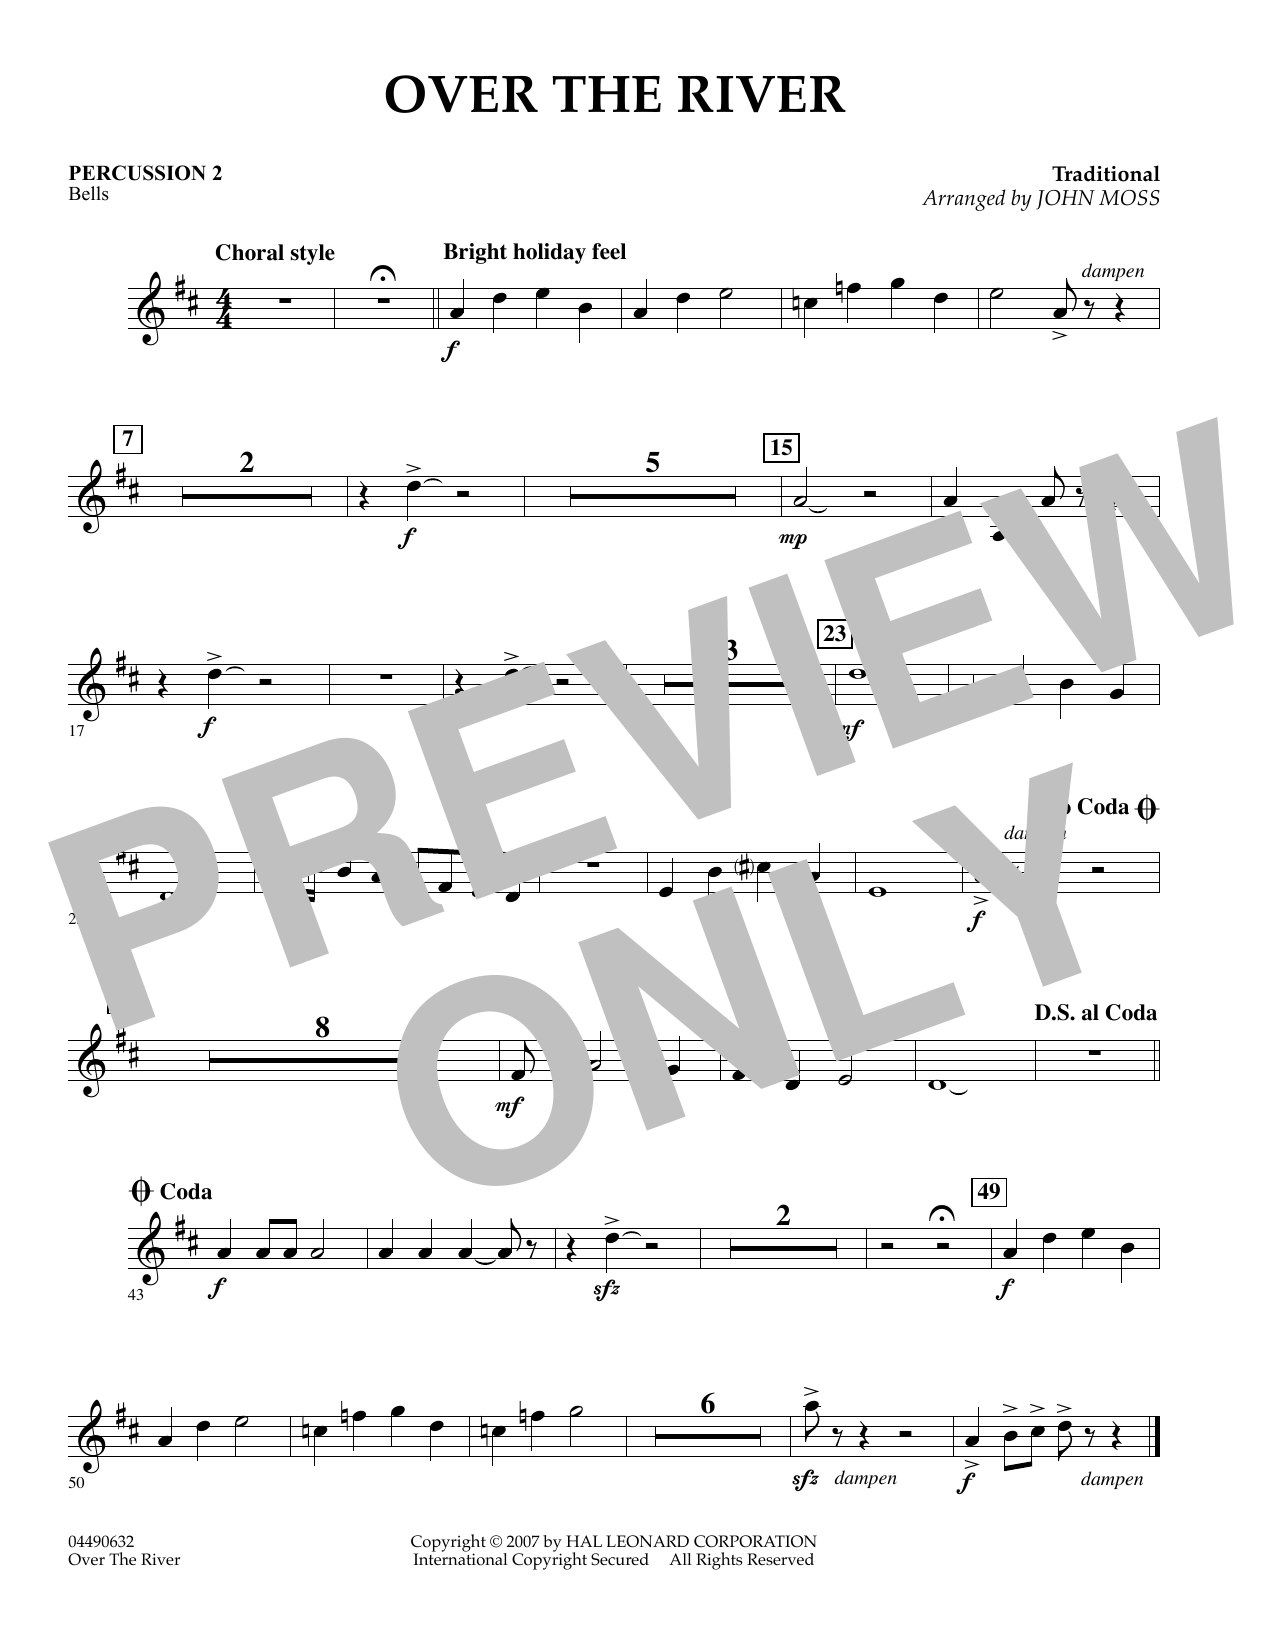 John Moss Over The River - Piano sheet music preview music notes and score for Orchestra including 1 page(s)